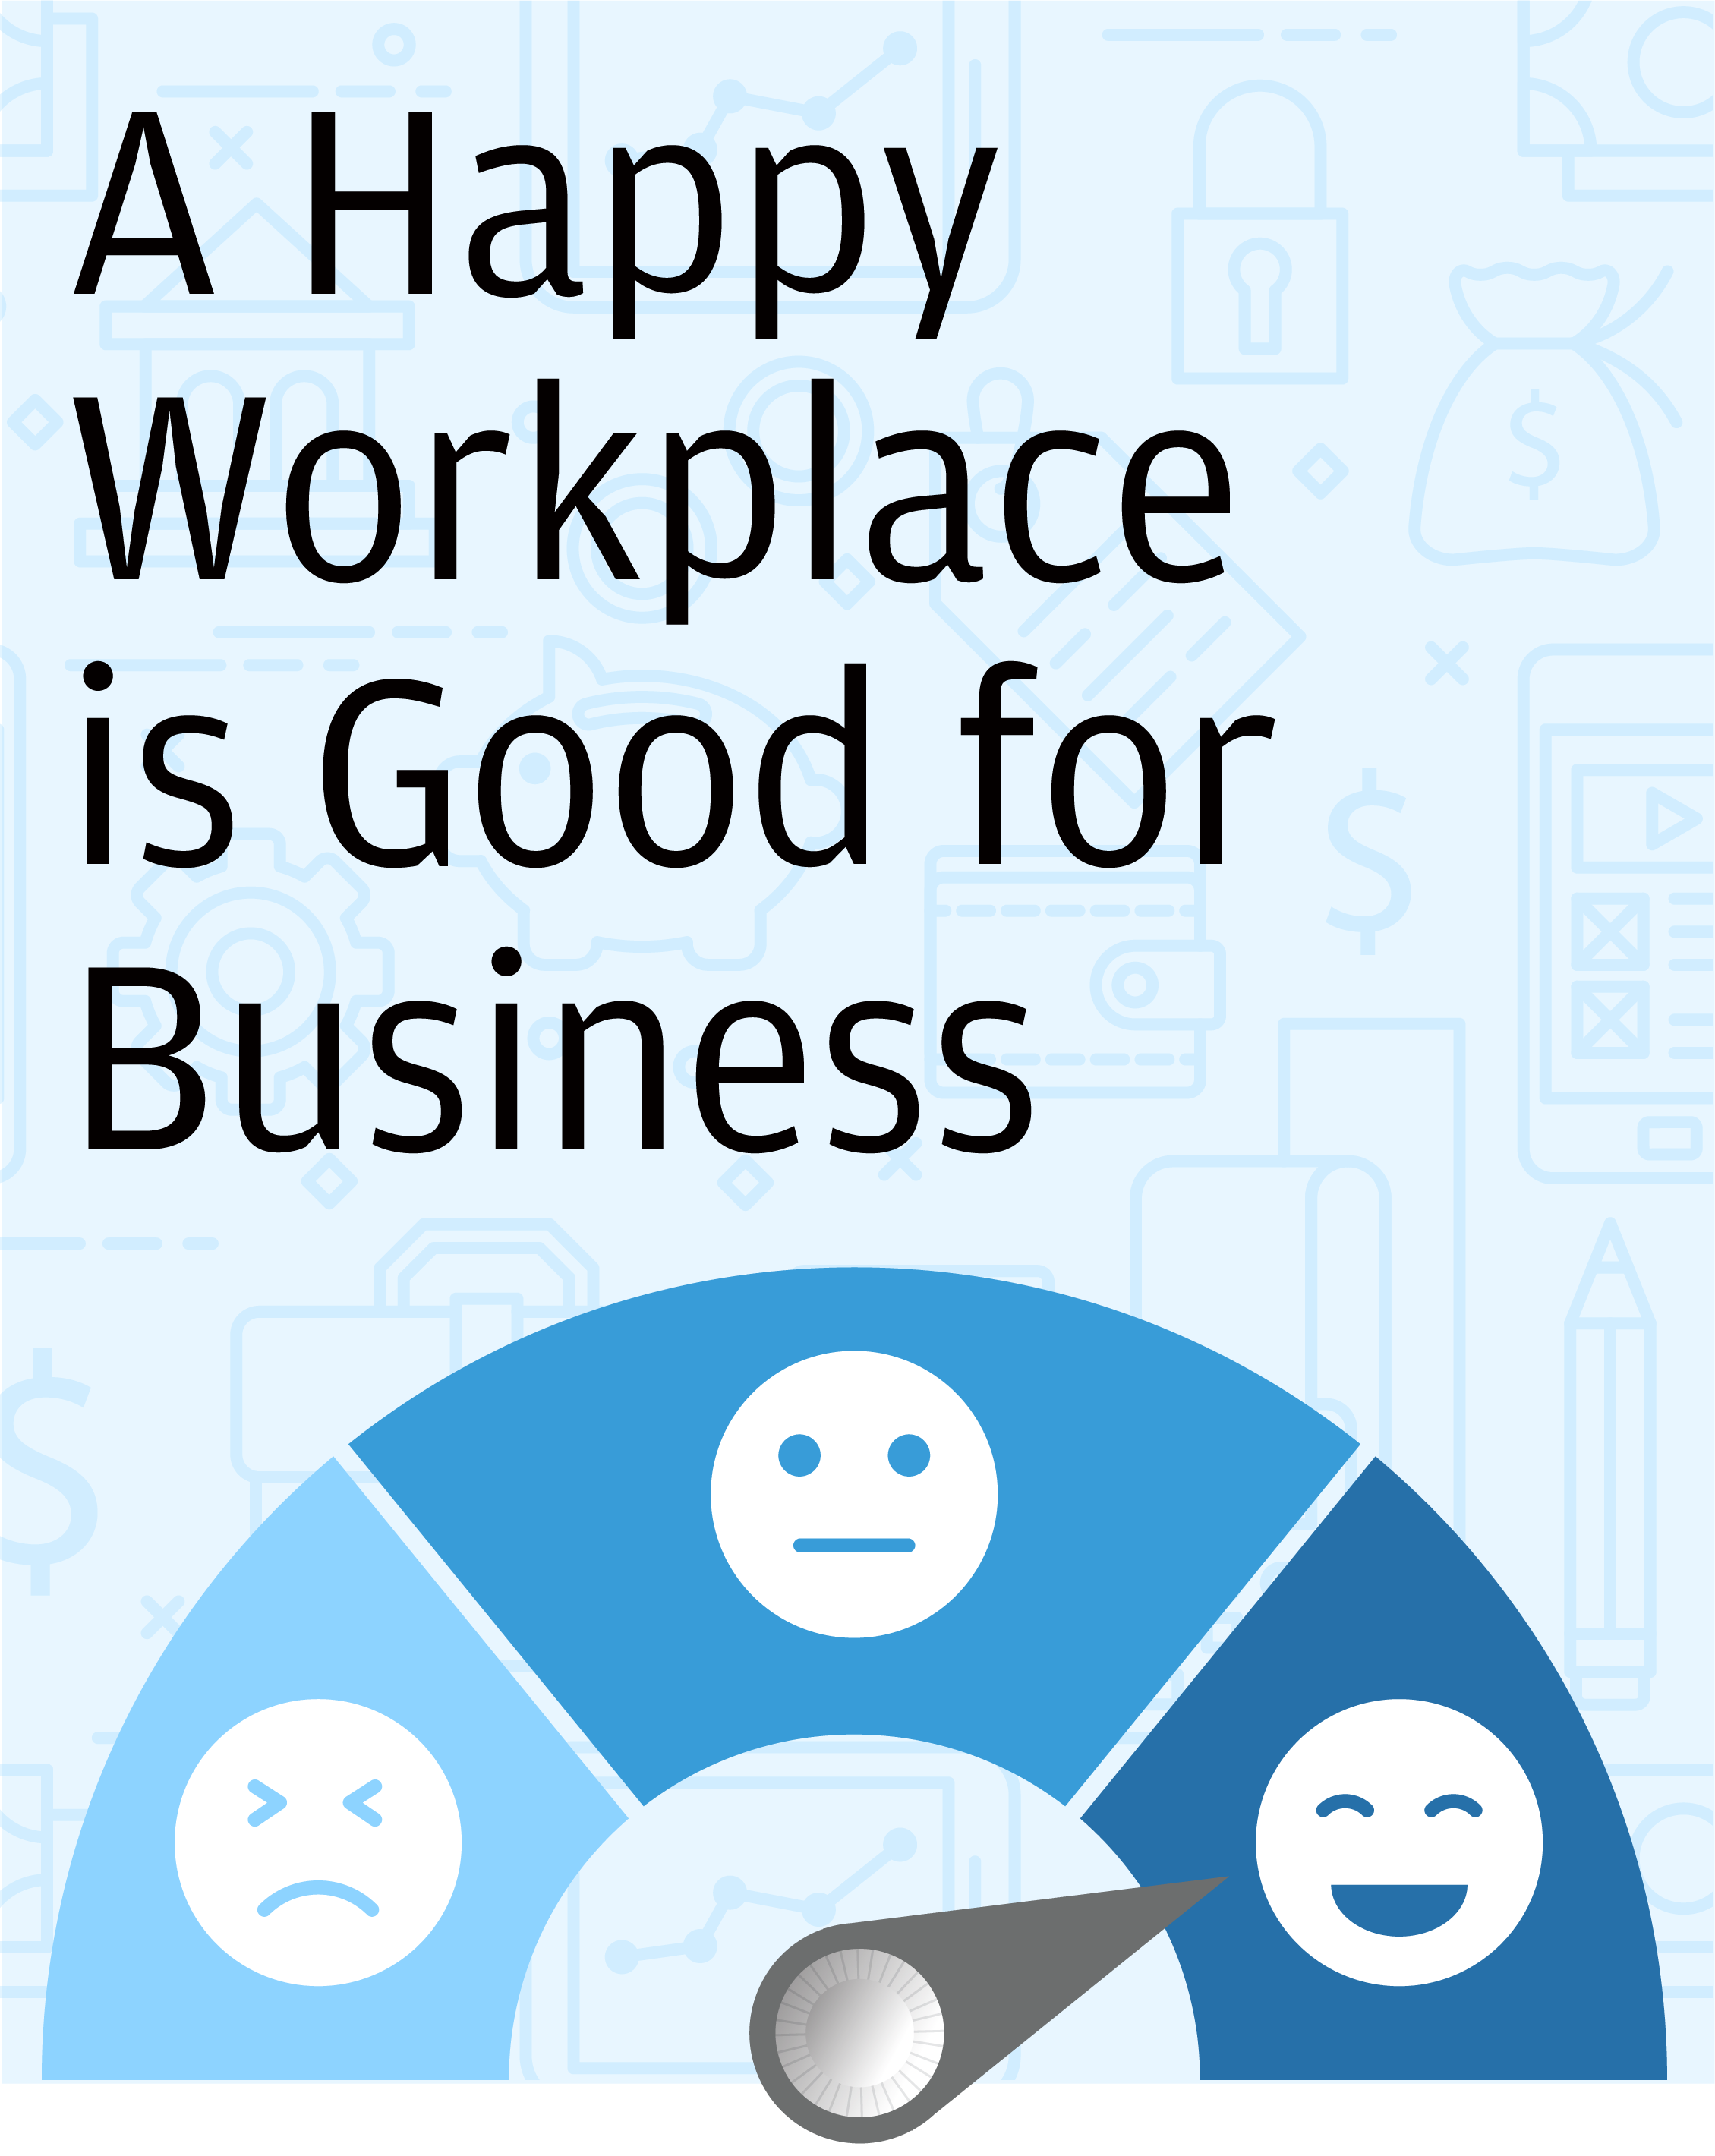 A happy workplace is good for business.